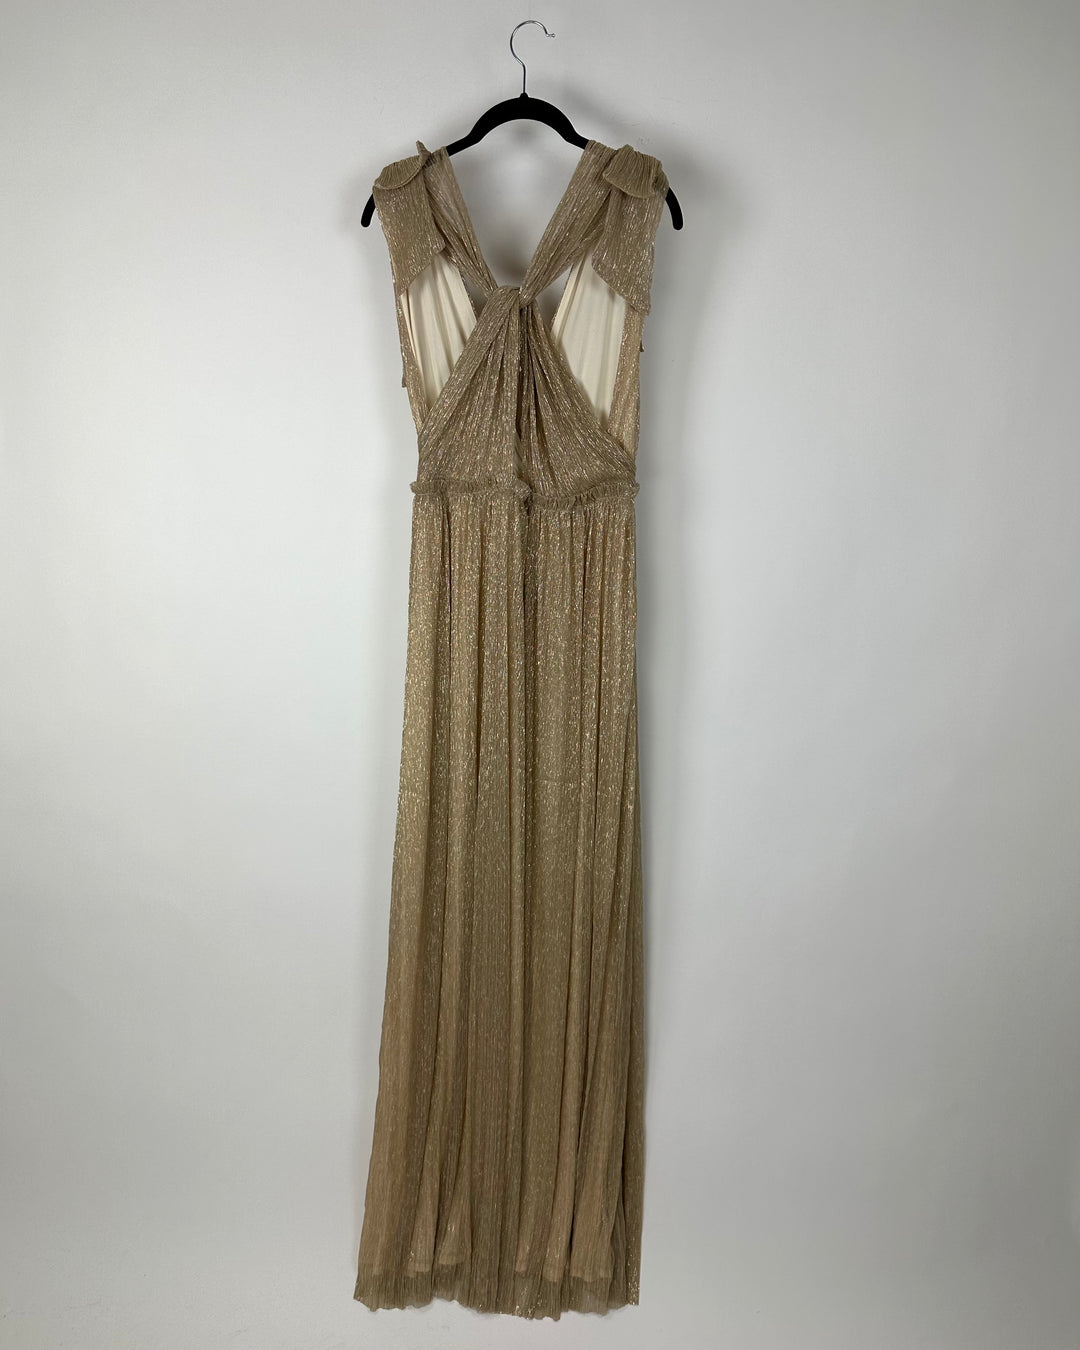 Gold Metallic Tie Shoulder Maxi Dress - Size 0/2 and 14/16